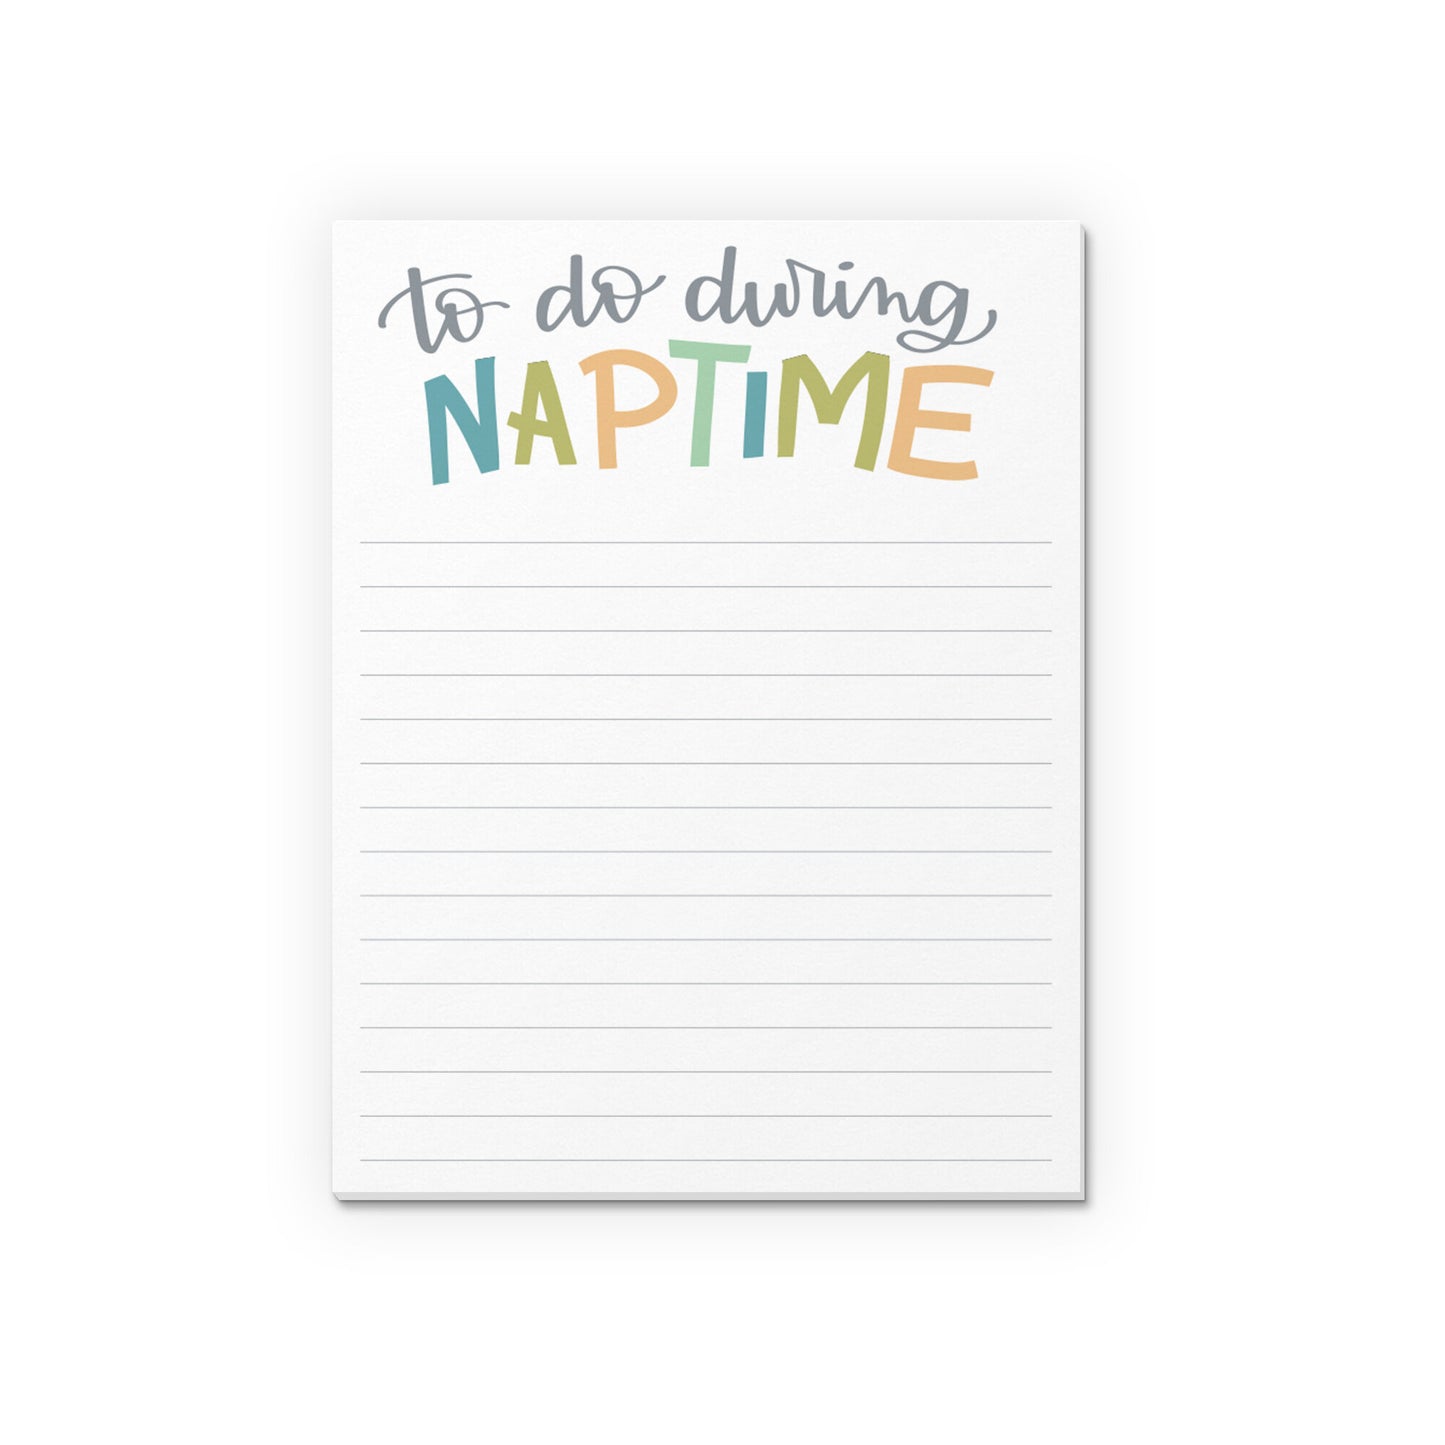 Mini notepad with the hand lettered text, to do during naptime.